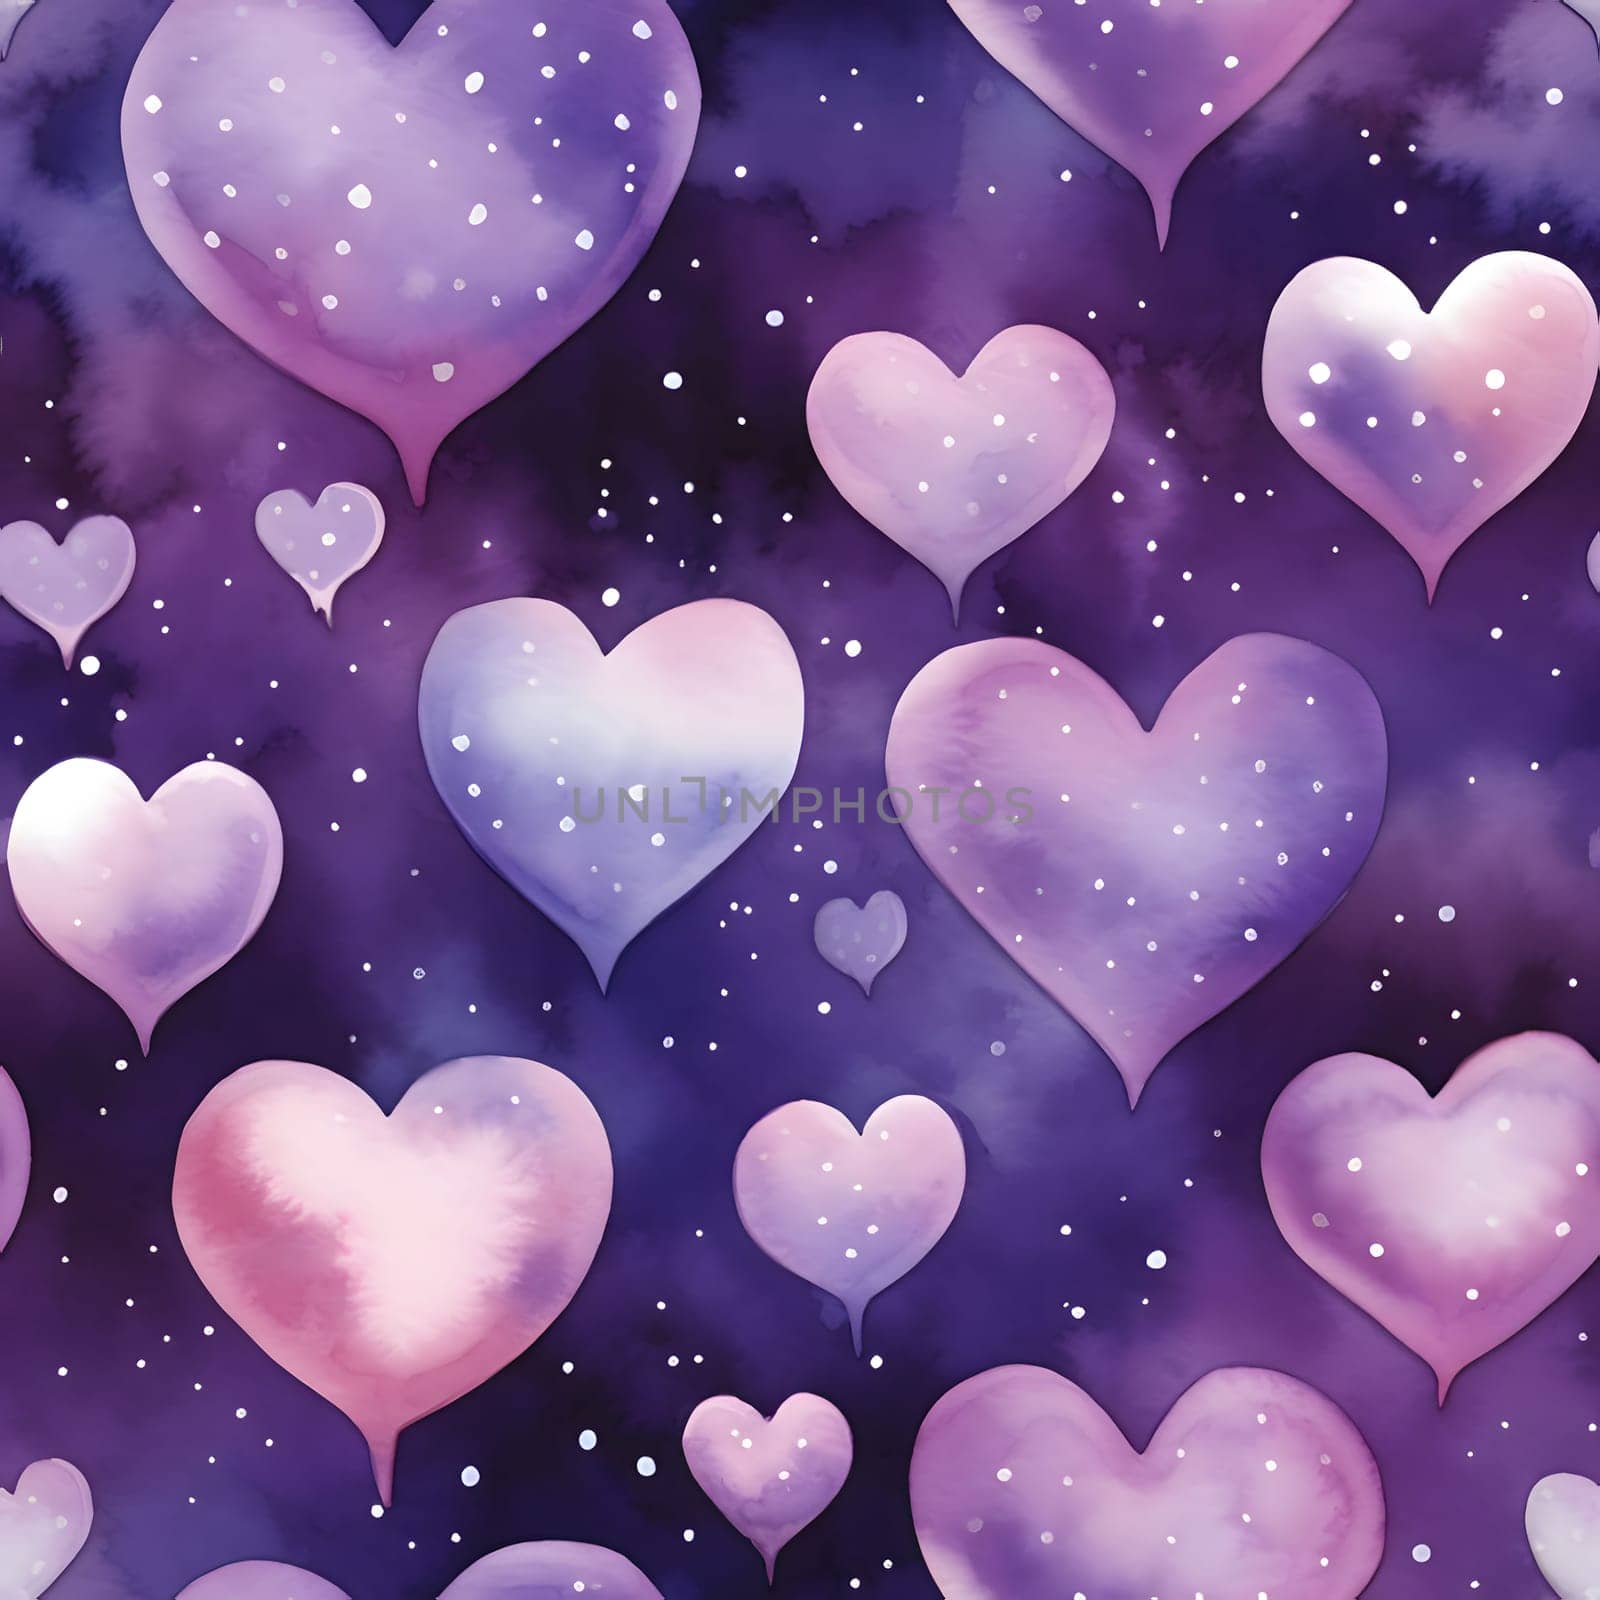 Elegant and modern. Pink and purple hearts as abstract background, wallpaper, banner, texture design with pattern - vector.